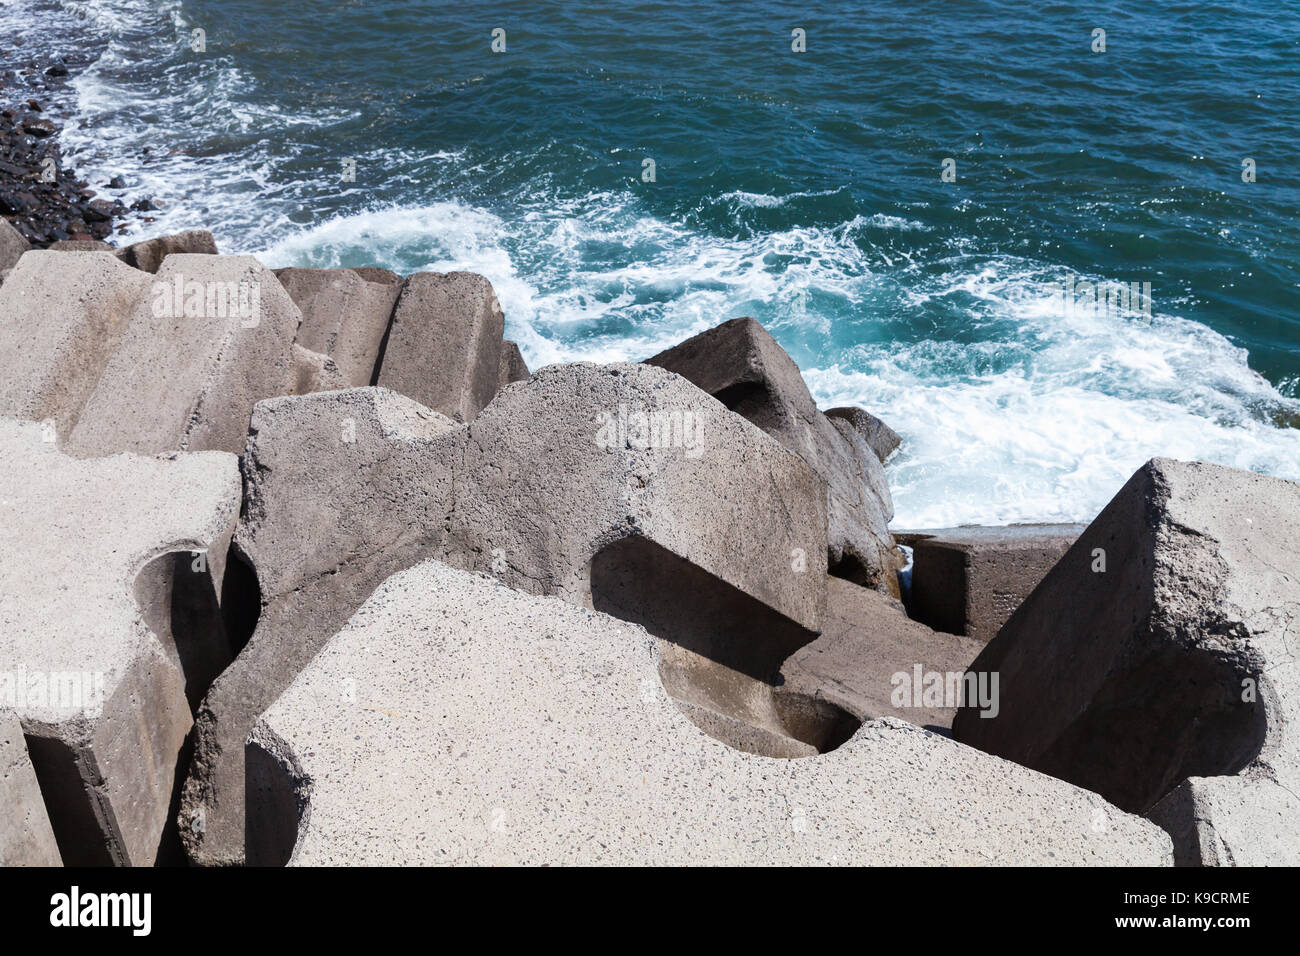 Massive concrete blocks as a part of breakwater structure for protection from ocean storm waves Stock Photo